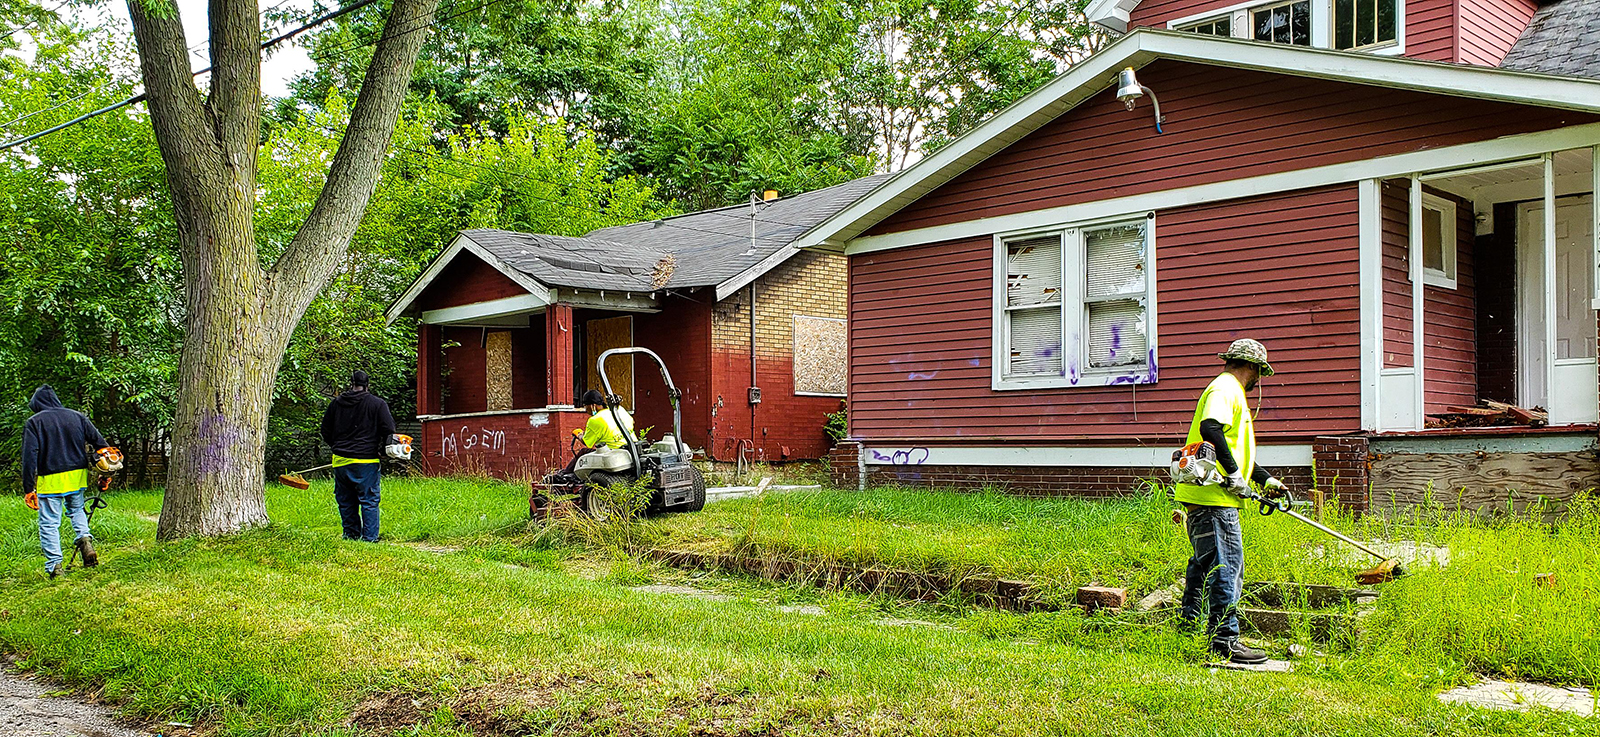 A crew works to clean up lawns in front of houses.